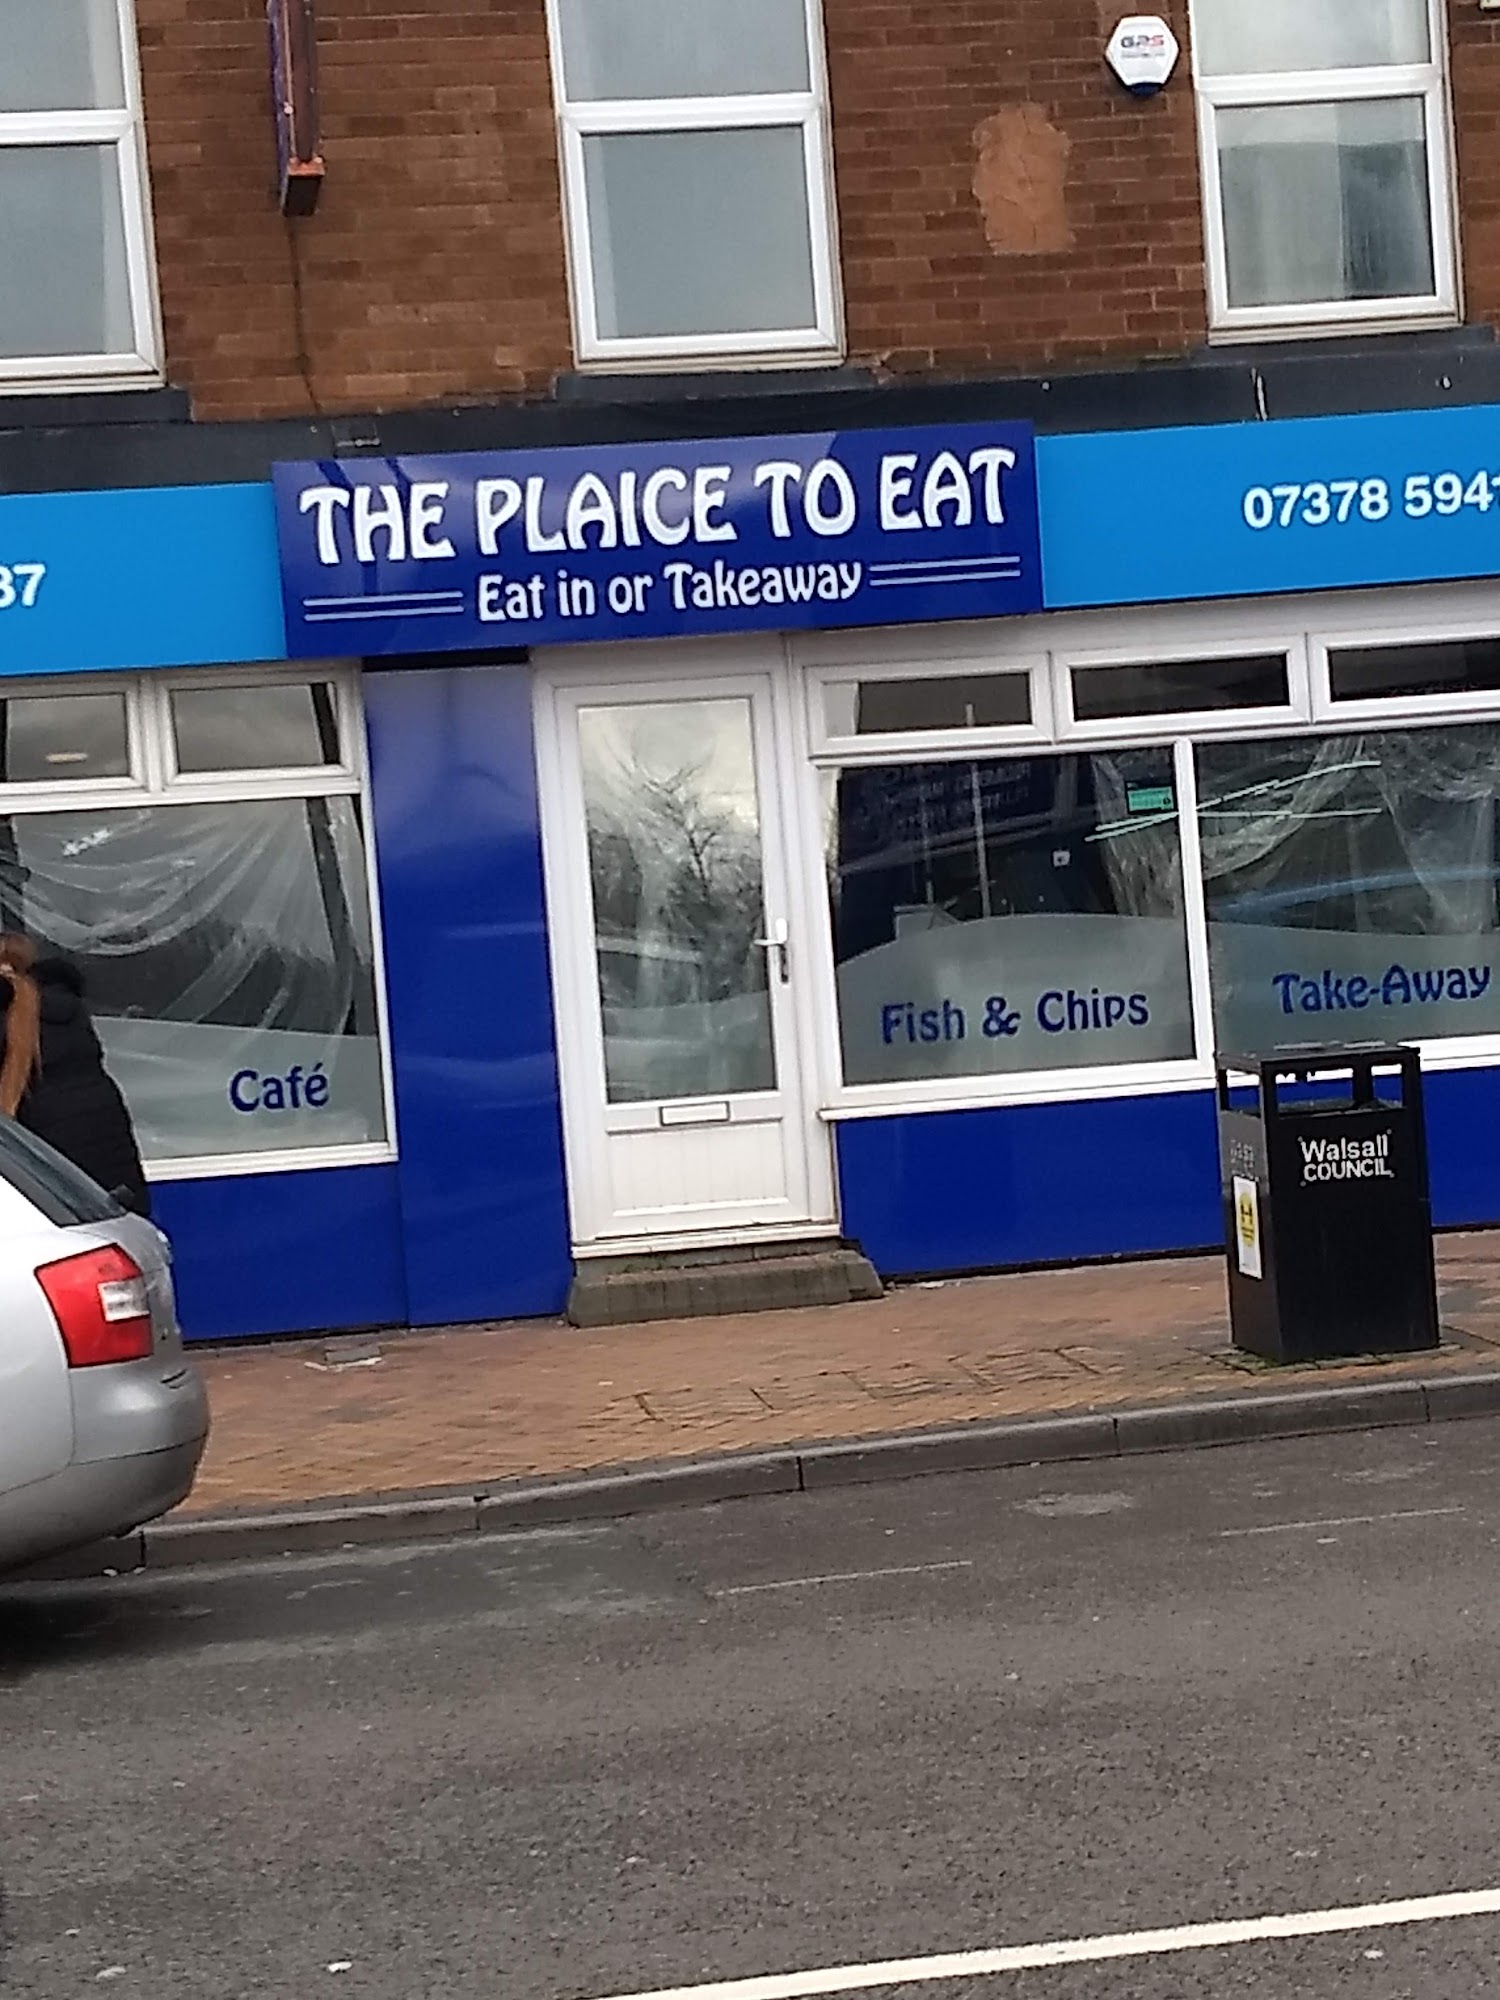 THE PLAICE TO EAT (BROWNHILLS) LIMITED